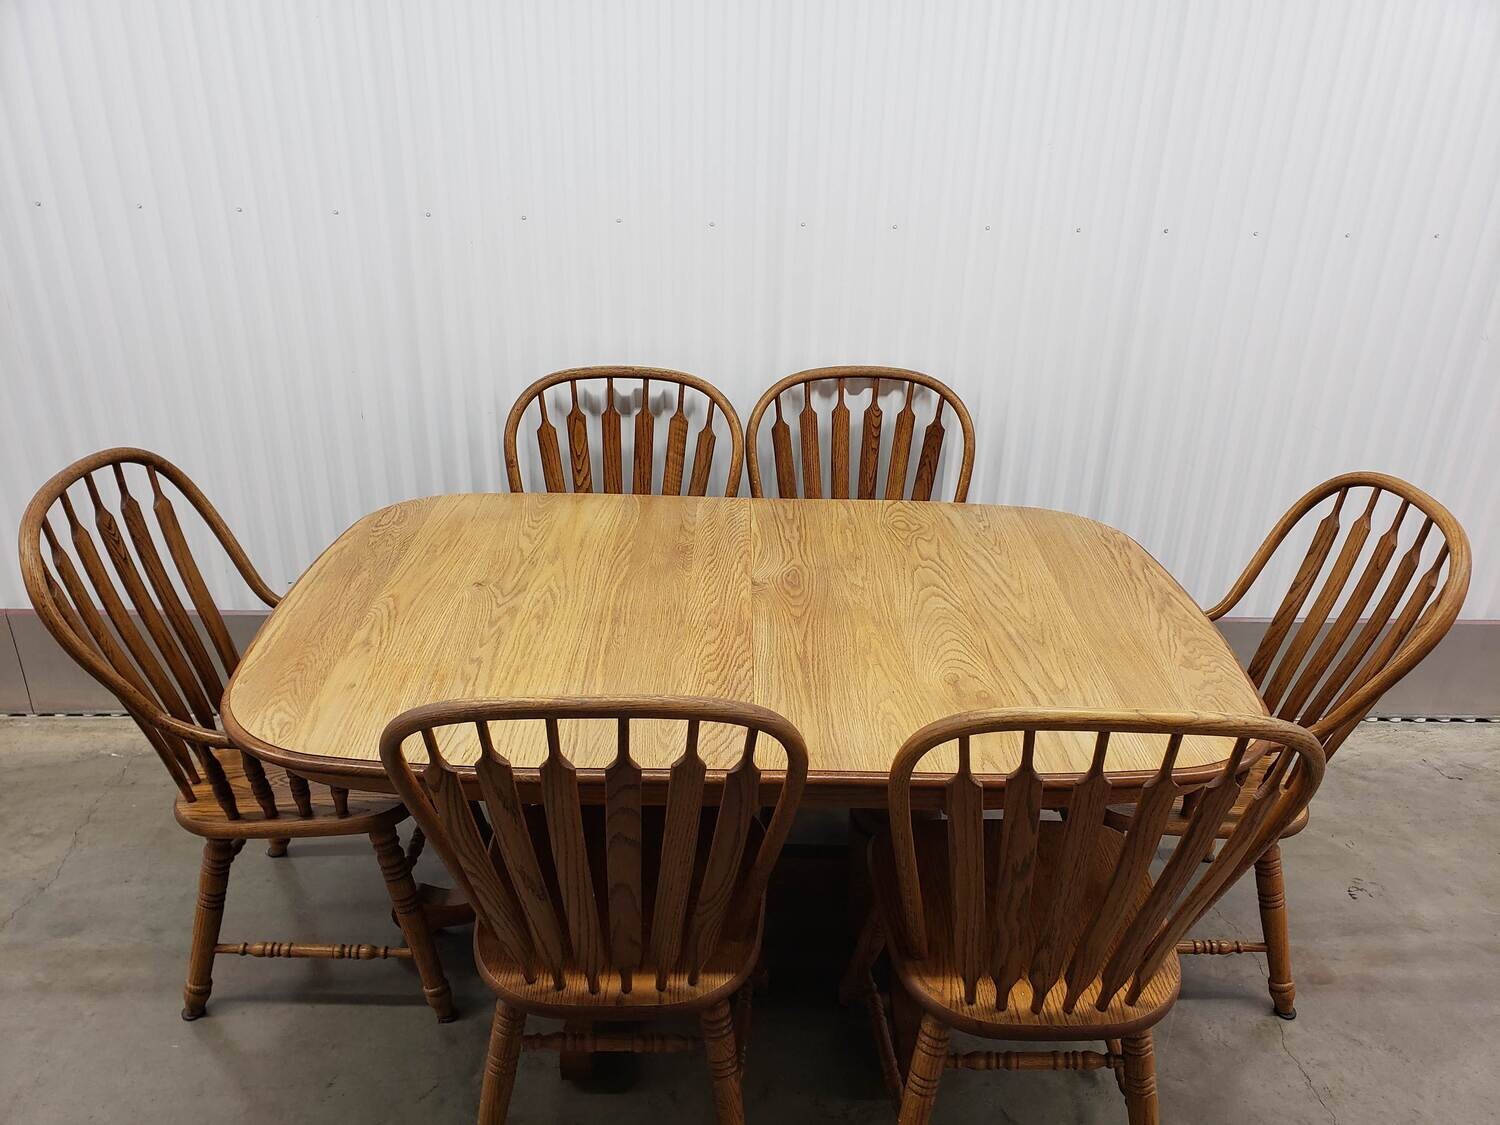 Oak Dining Room Set with 6 Chairs, extends to 9 ft #2349